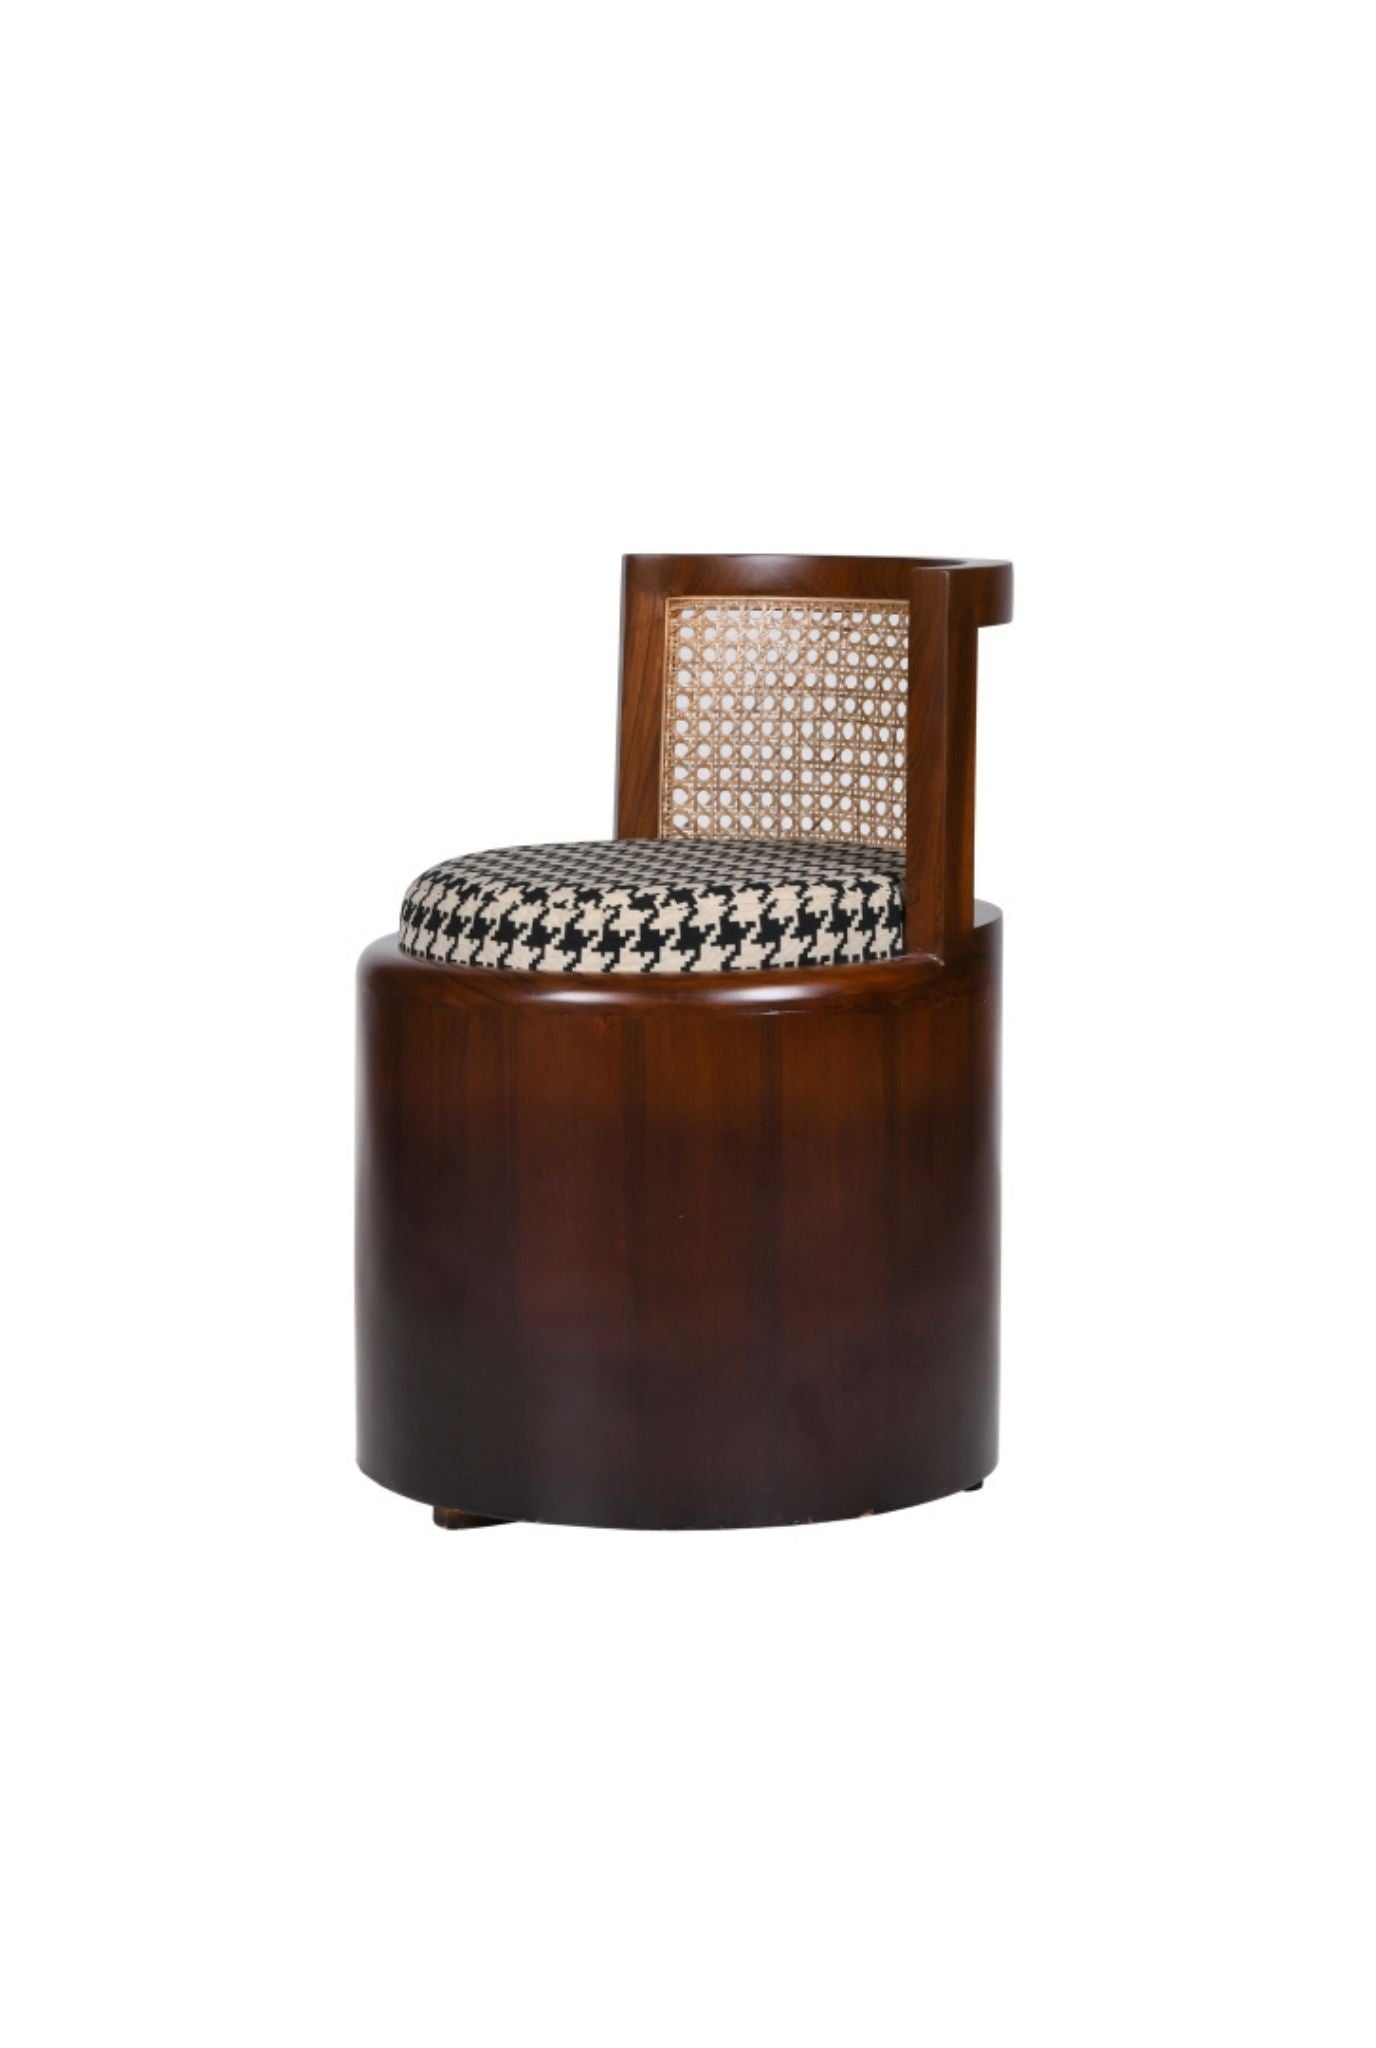 Mangko Accent Chair (SHIPPING ONLY IN INDIA)